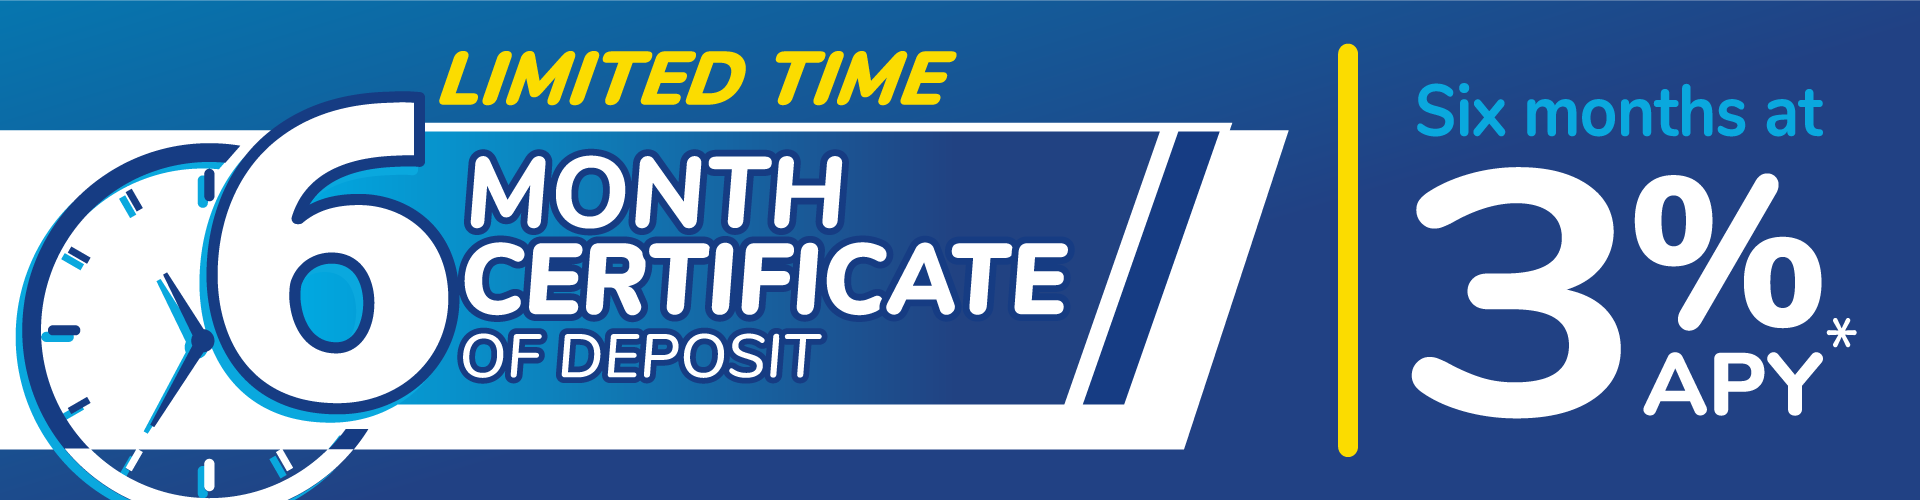 LIMITED TIME 6-MONTH CERTIFICATE | 3% APY